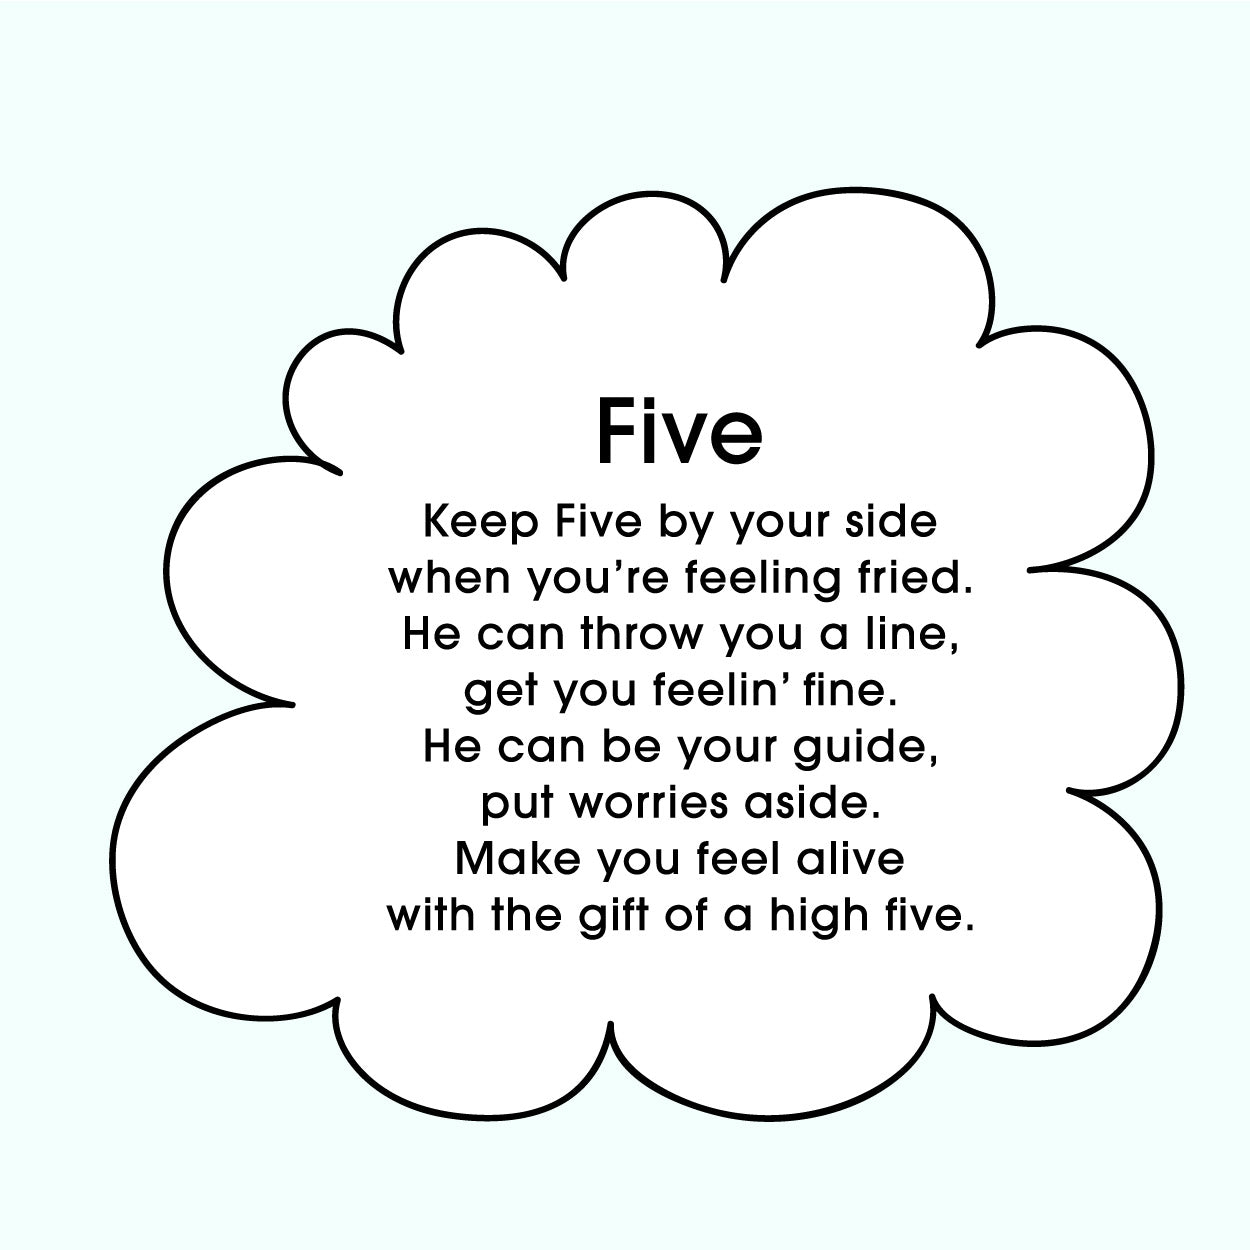 Meet Five by Monica Escobar Allen. The MoMeMans® are on a mission to bring joy to parenting by finding the funny, sunny side with Poetry + Songs + Art + Gifts for Creative Grown-Up Kids. Brooklyn, NY